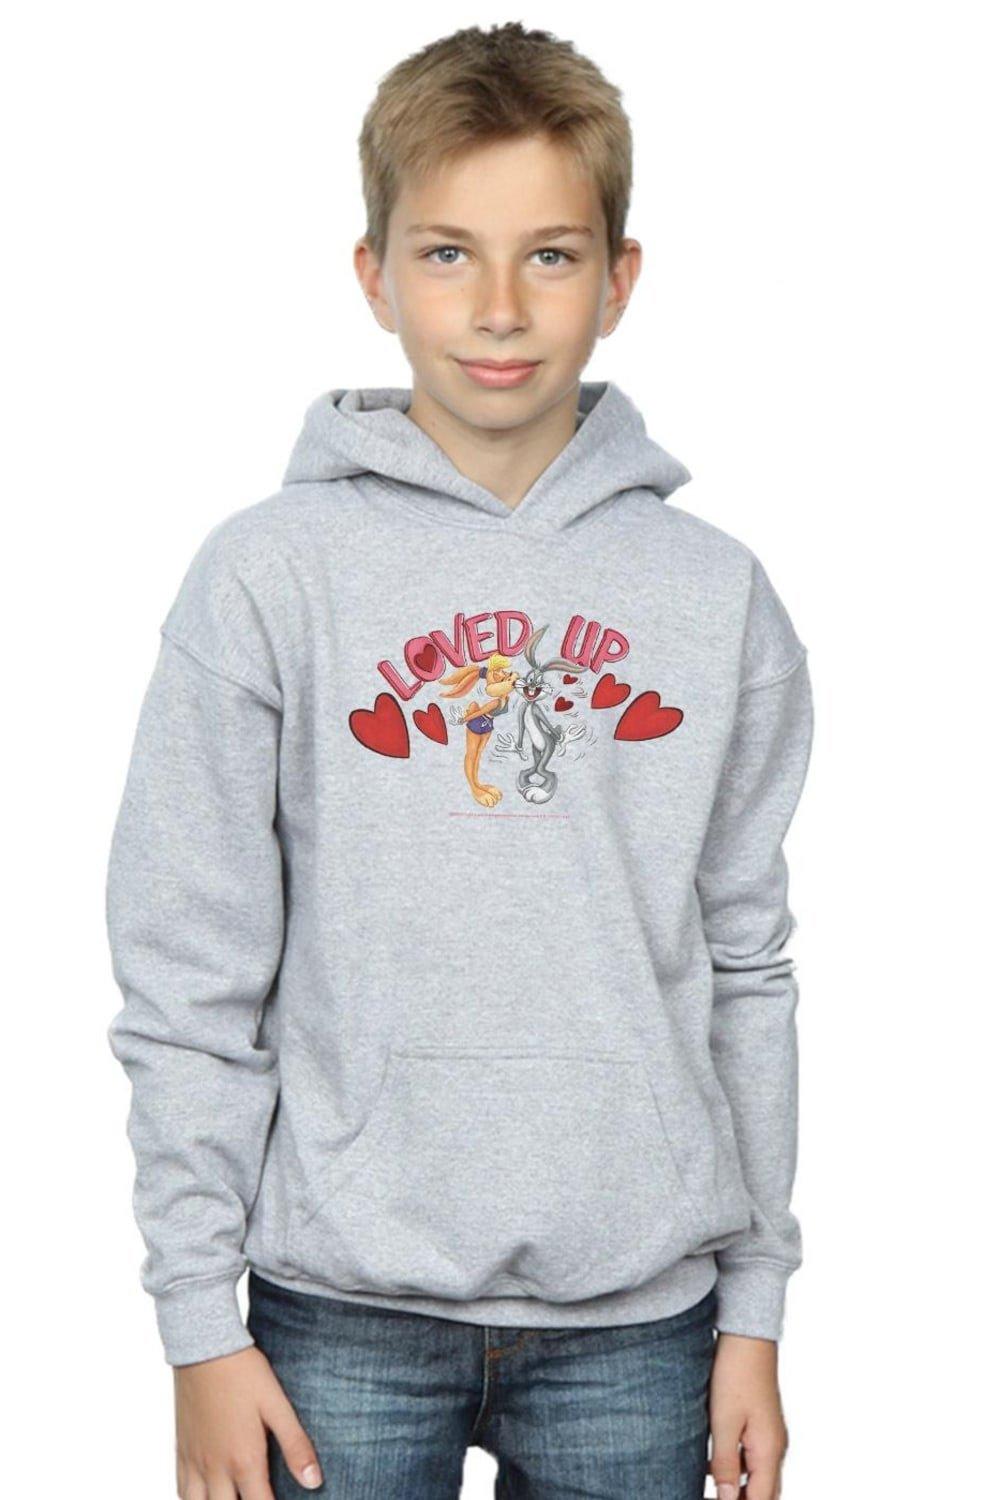 Bugs Bunny And Lola Valentine’s Day Loved Up Hoodie